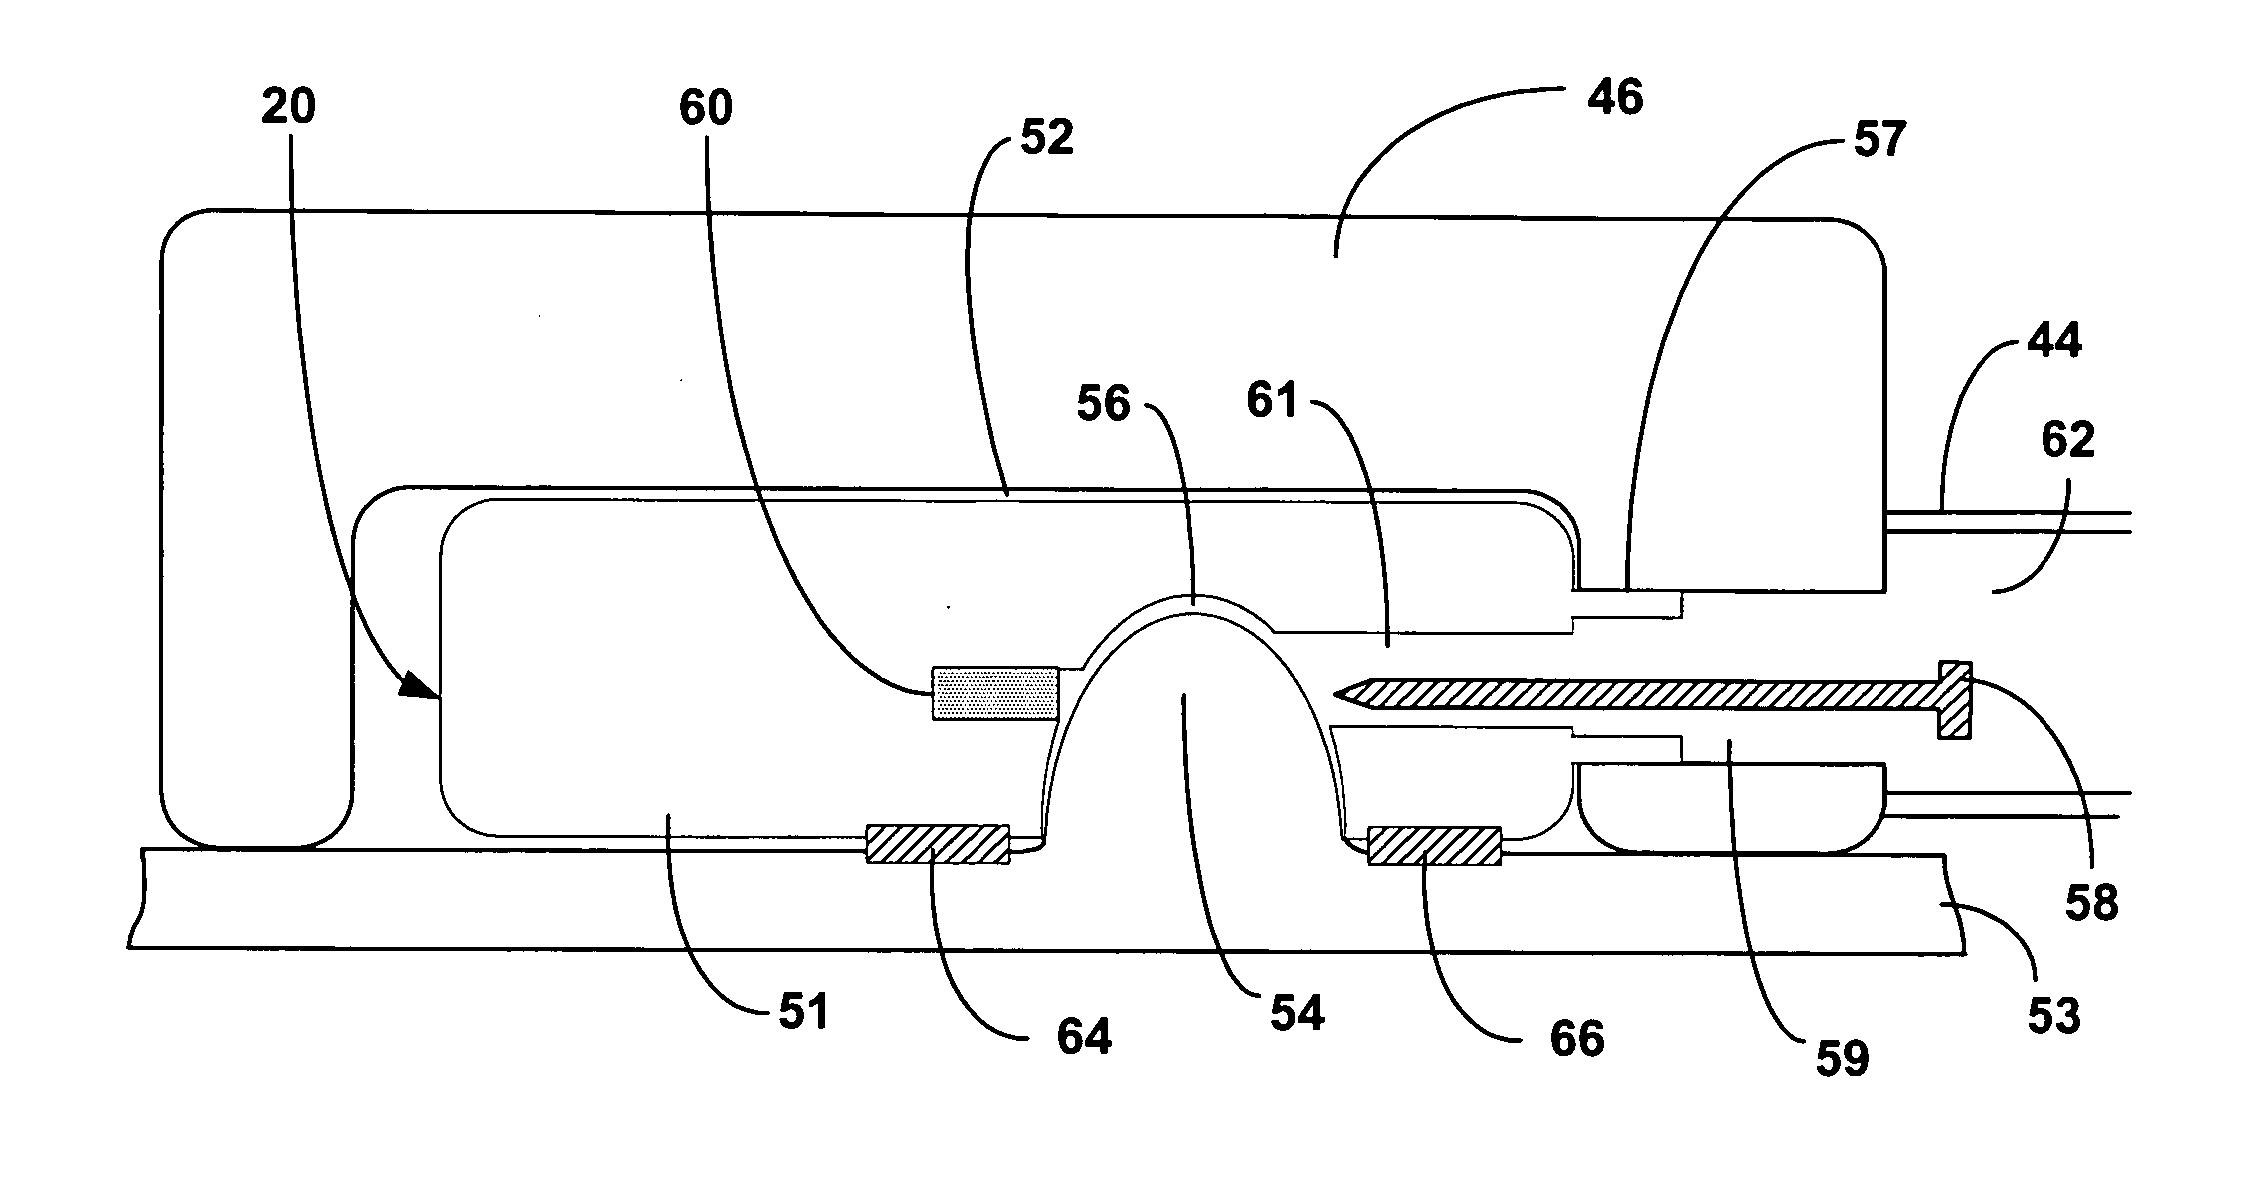 Intra-luminal device for gastrointestinal electrical stimulation